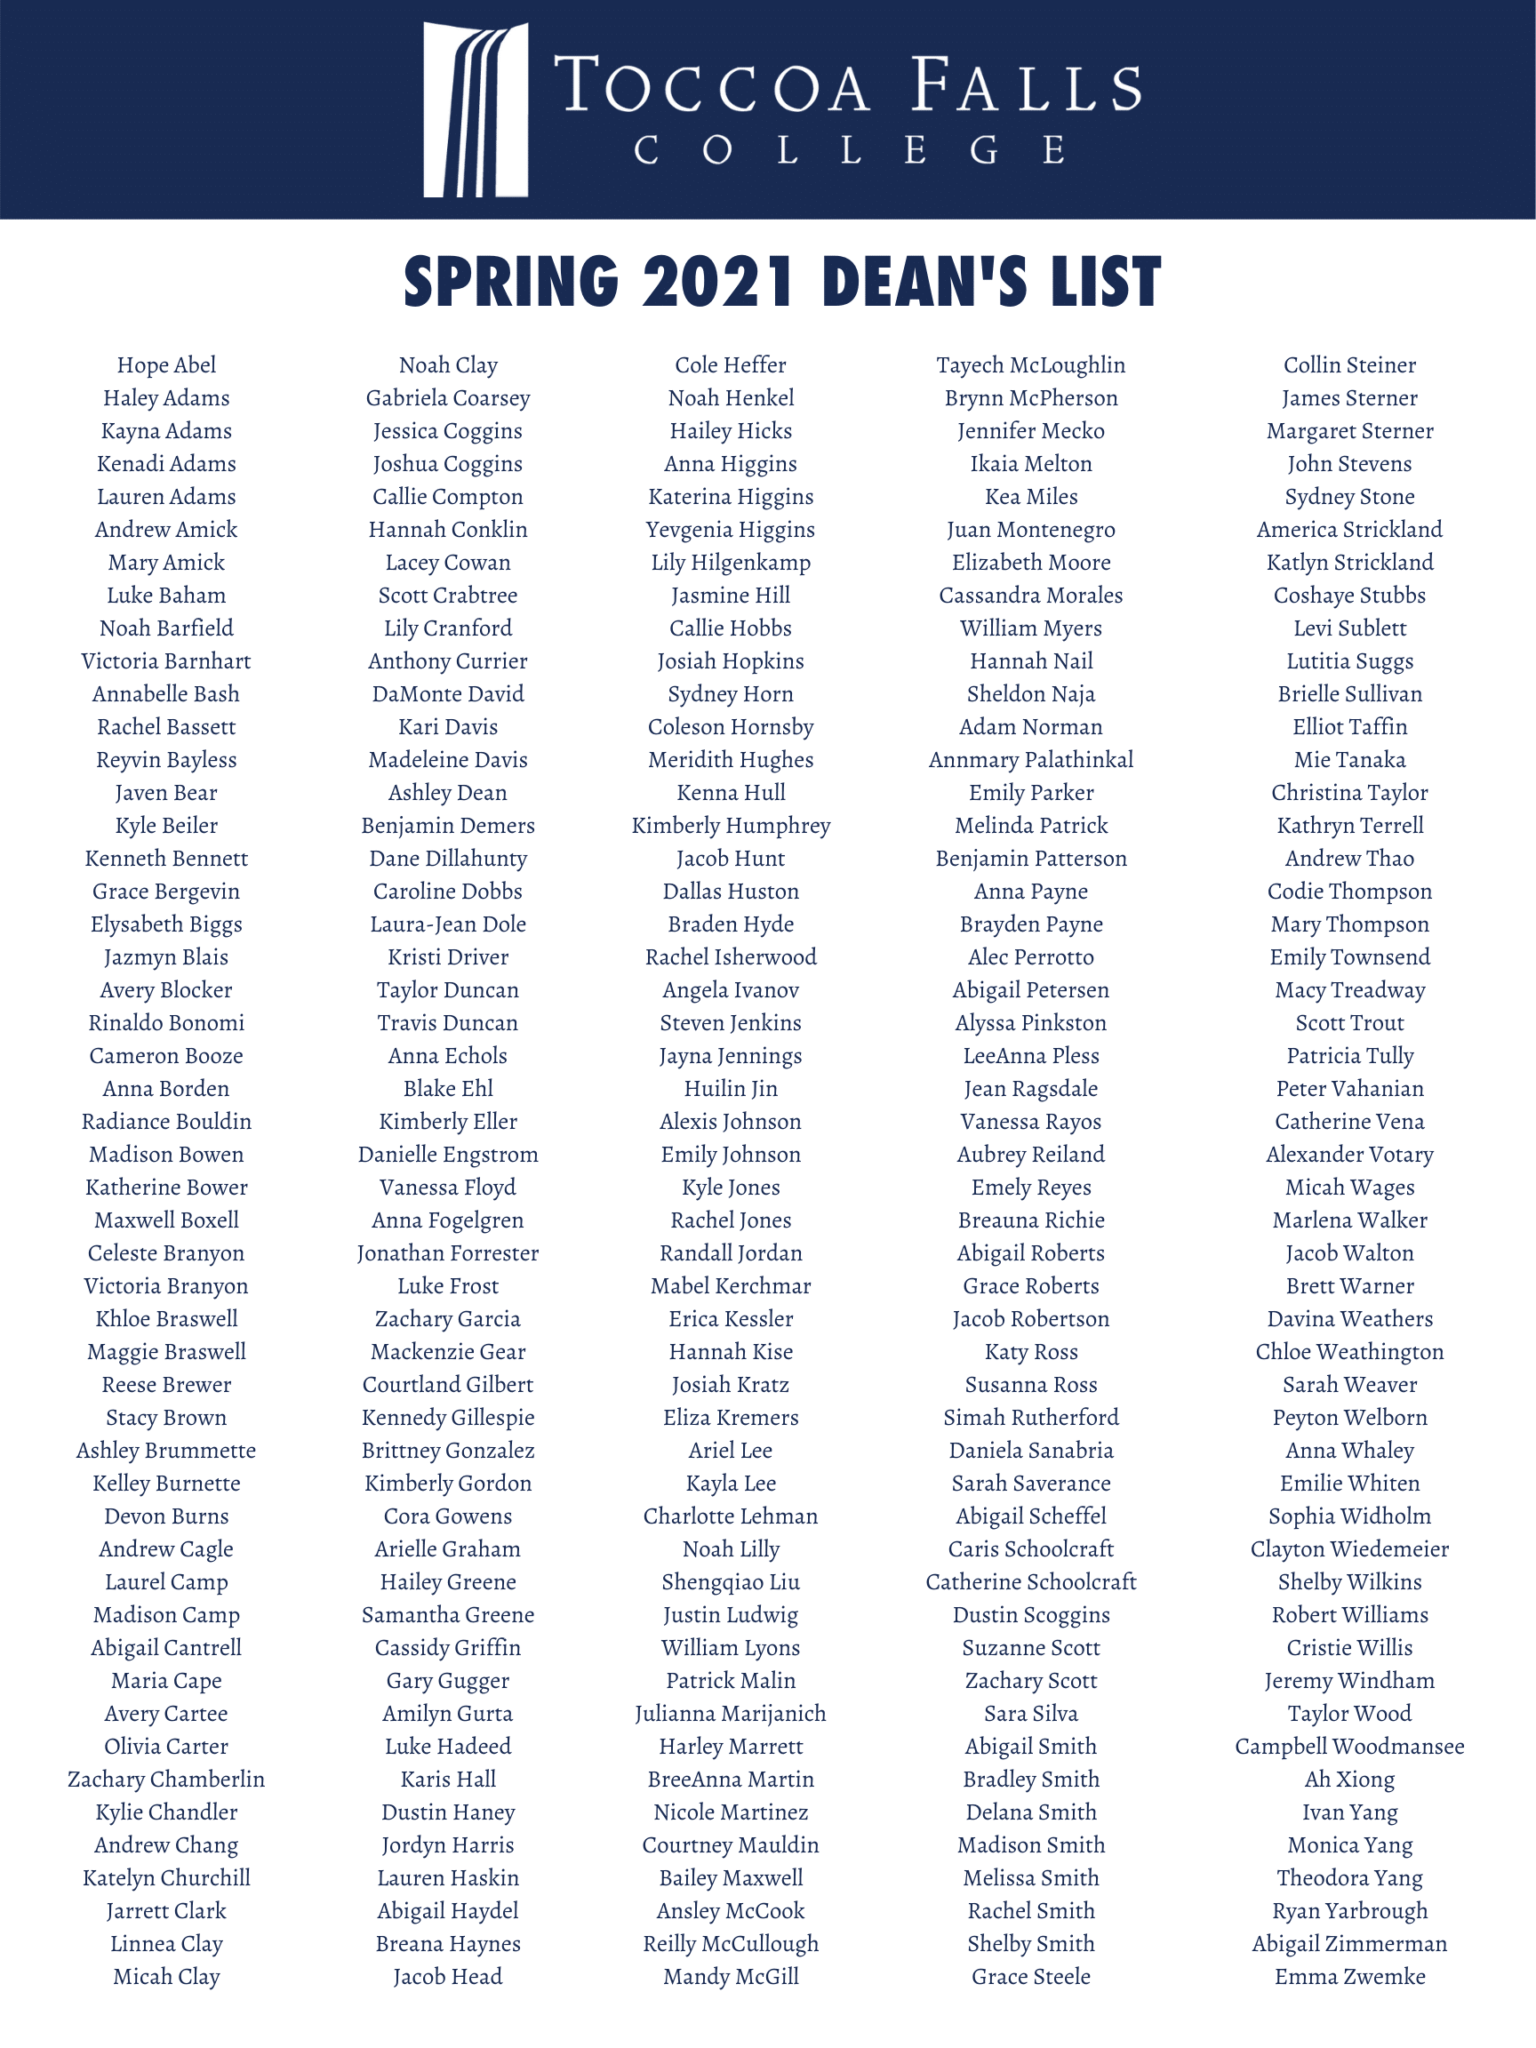 Spring 2021 Dean's List Toccoa Falls College